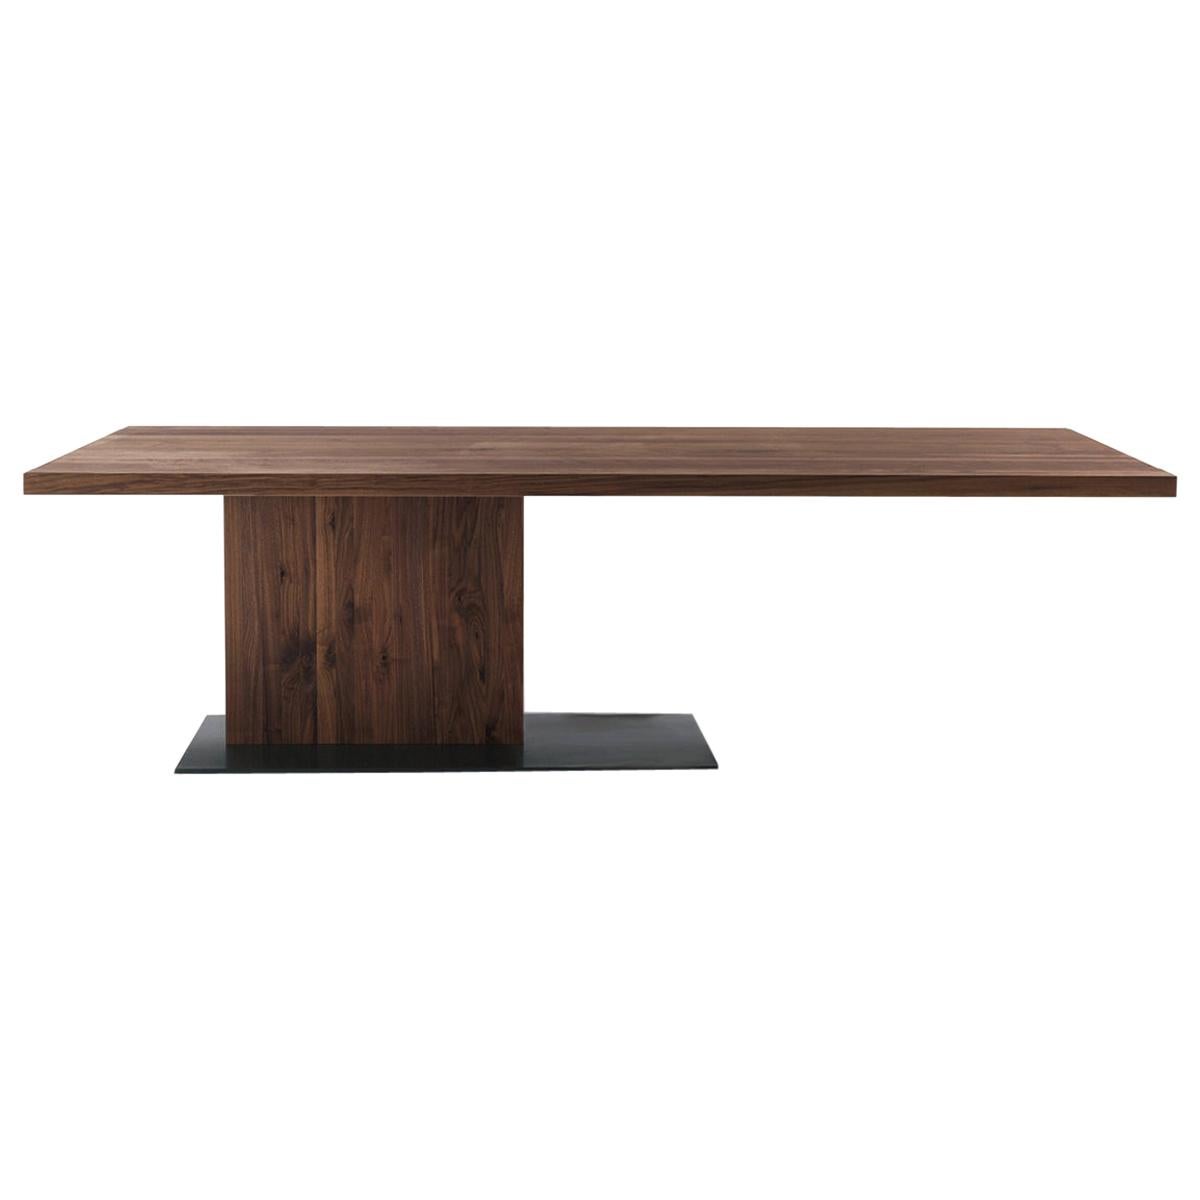 Stage Walnut Dining Table